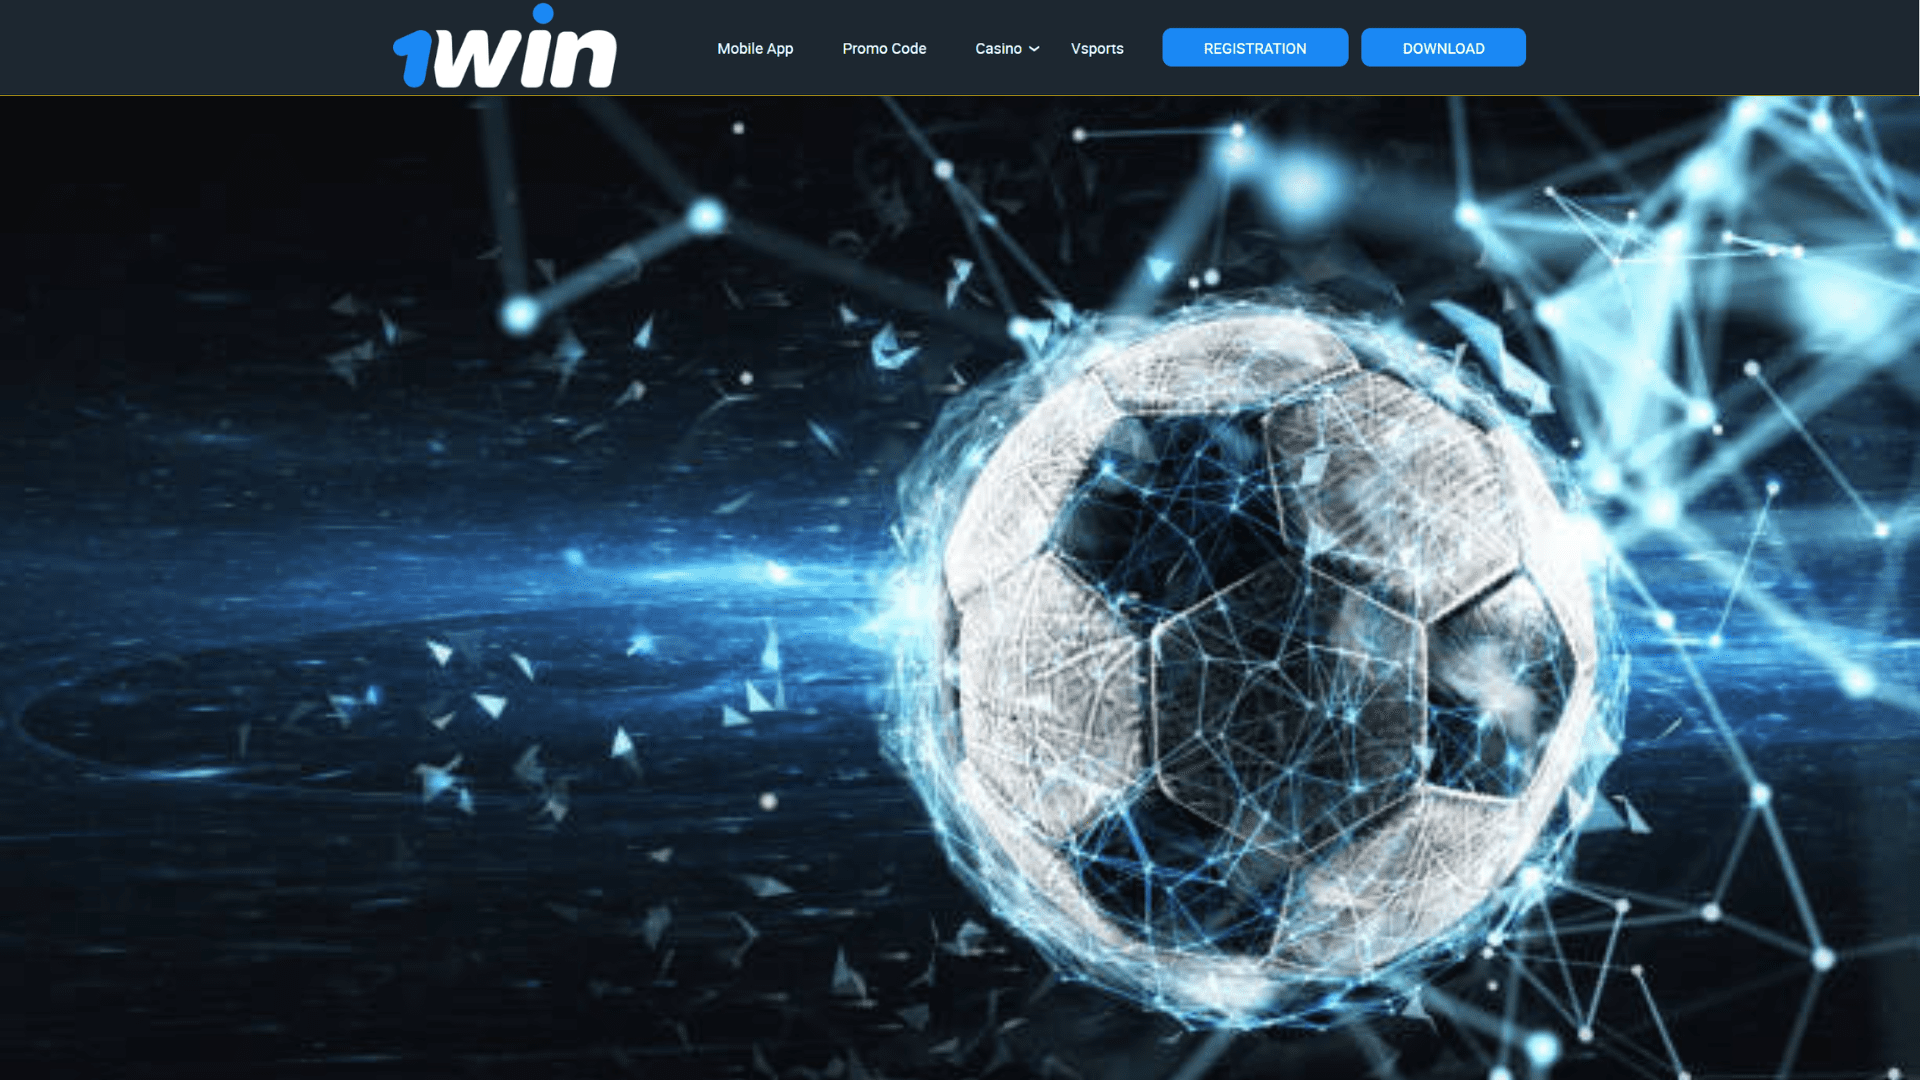 1Win Betting Company App for Android Big Bonuses 107310 1 - 1Win Betting Company - App for Android - Big Bonuses